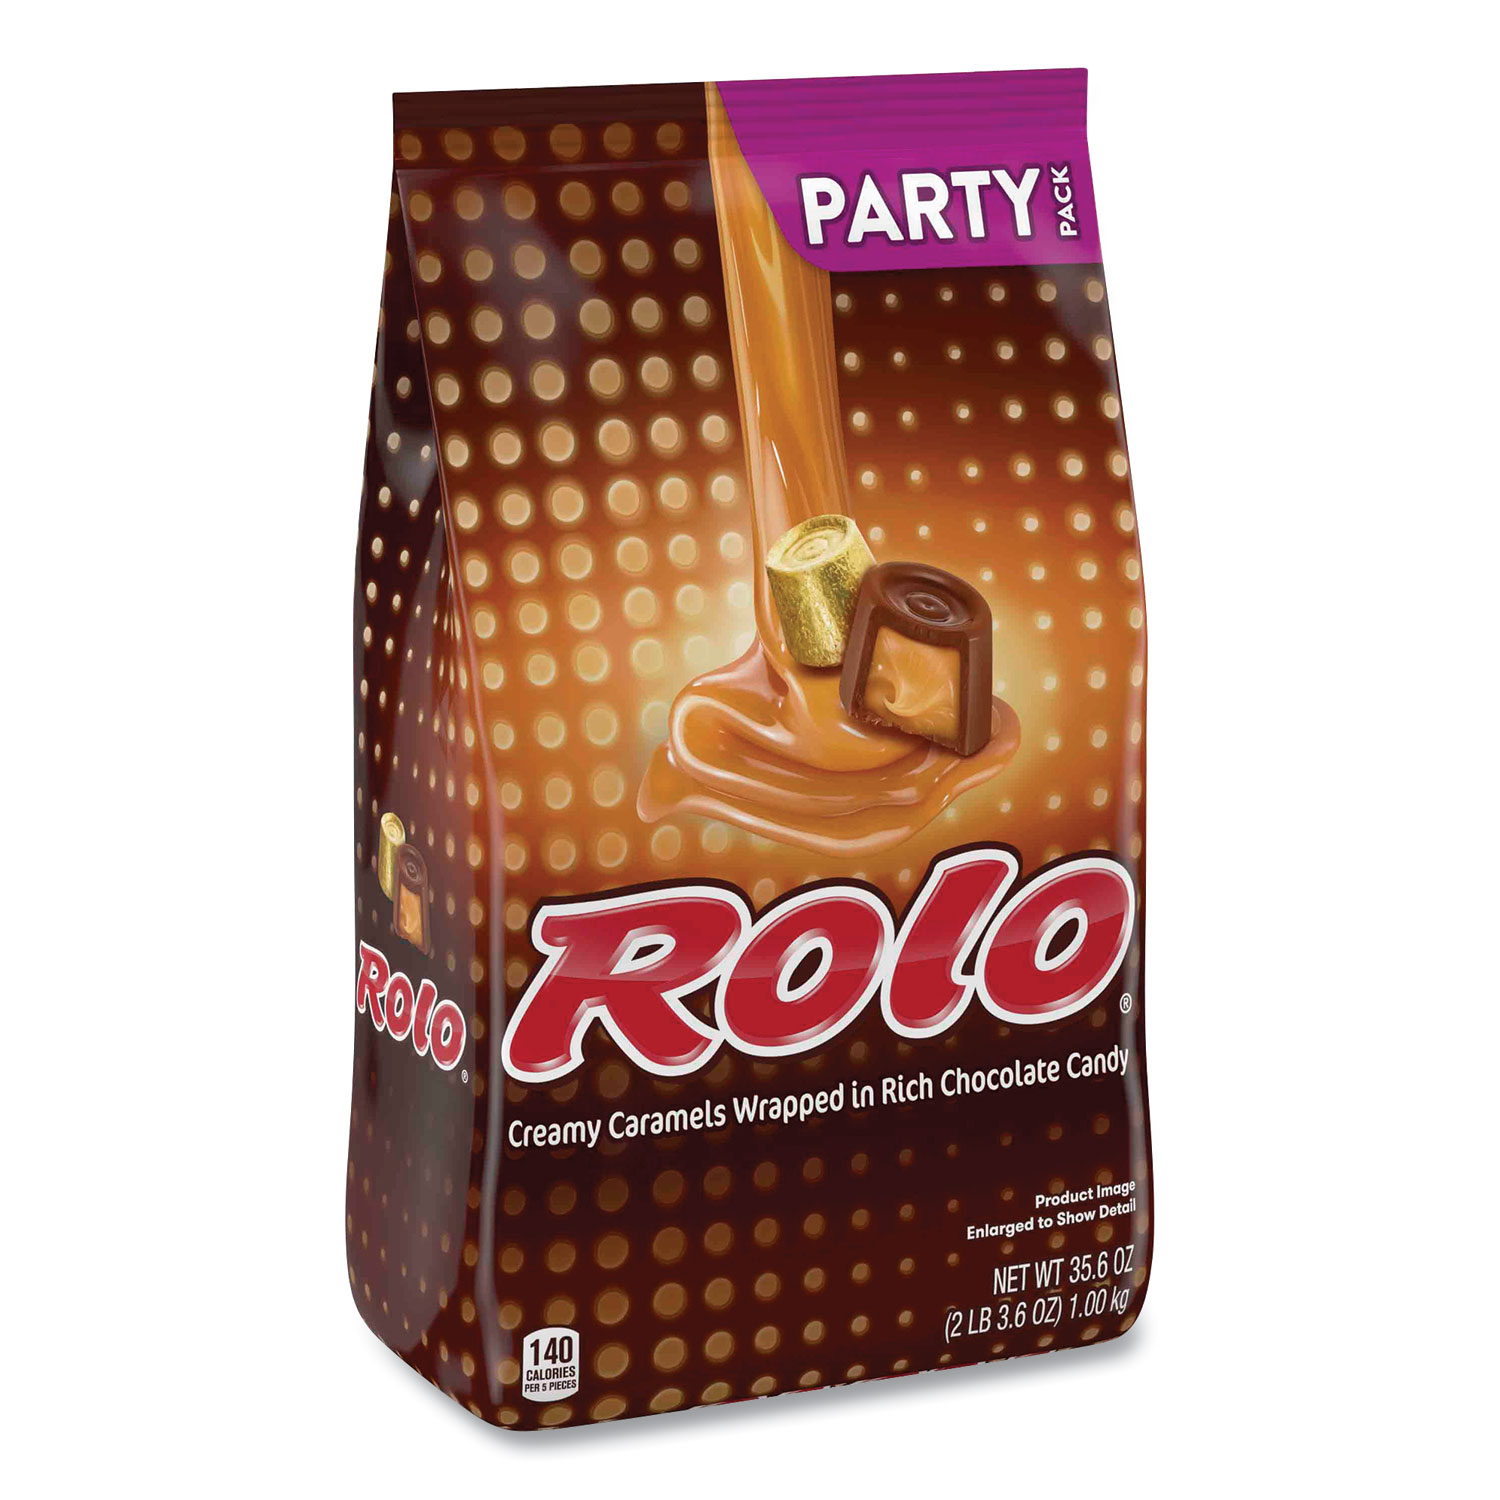  ROLO 37858 Party Pack Creamy Caramels Wrapped in Rich Chocolate Candy, 35.6 oz Bag, Free Delivery in 1-4 Business Days (GRR24600406) 